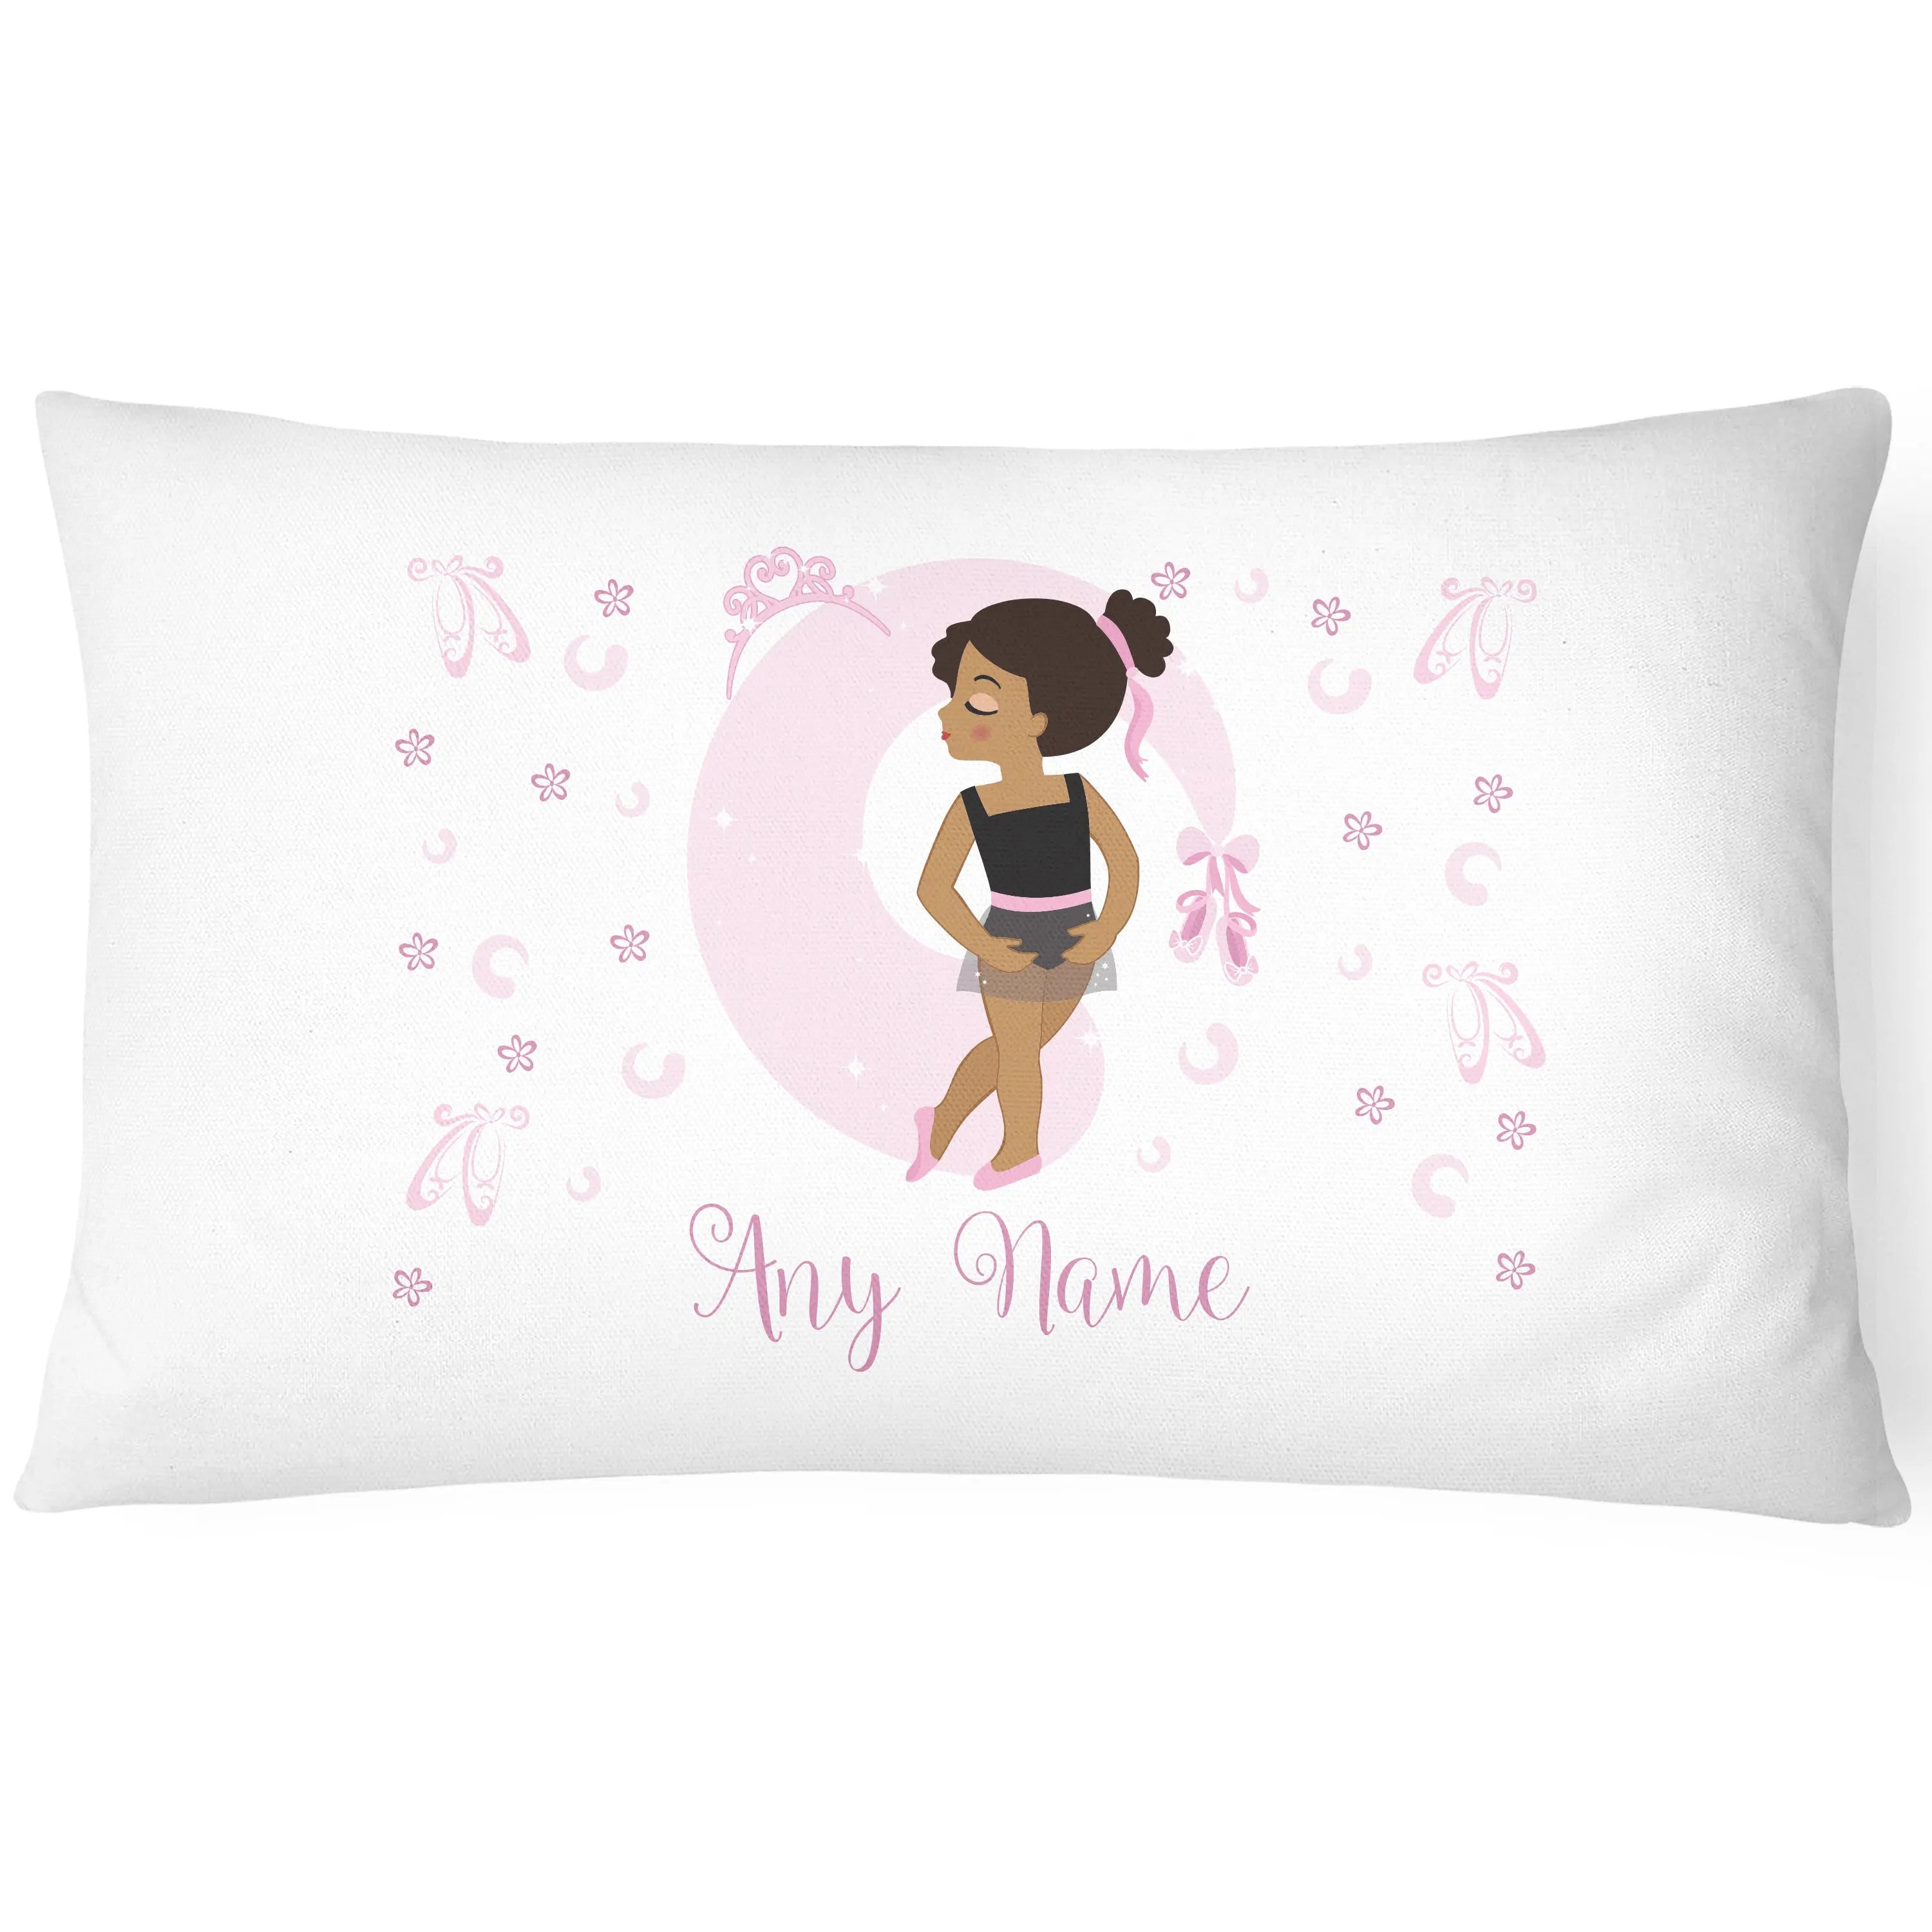 Ballerina Children's Pillowcase - Personalise with Any Name - Adorable - CushionPop